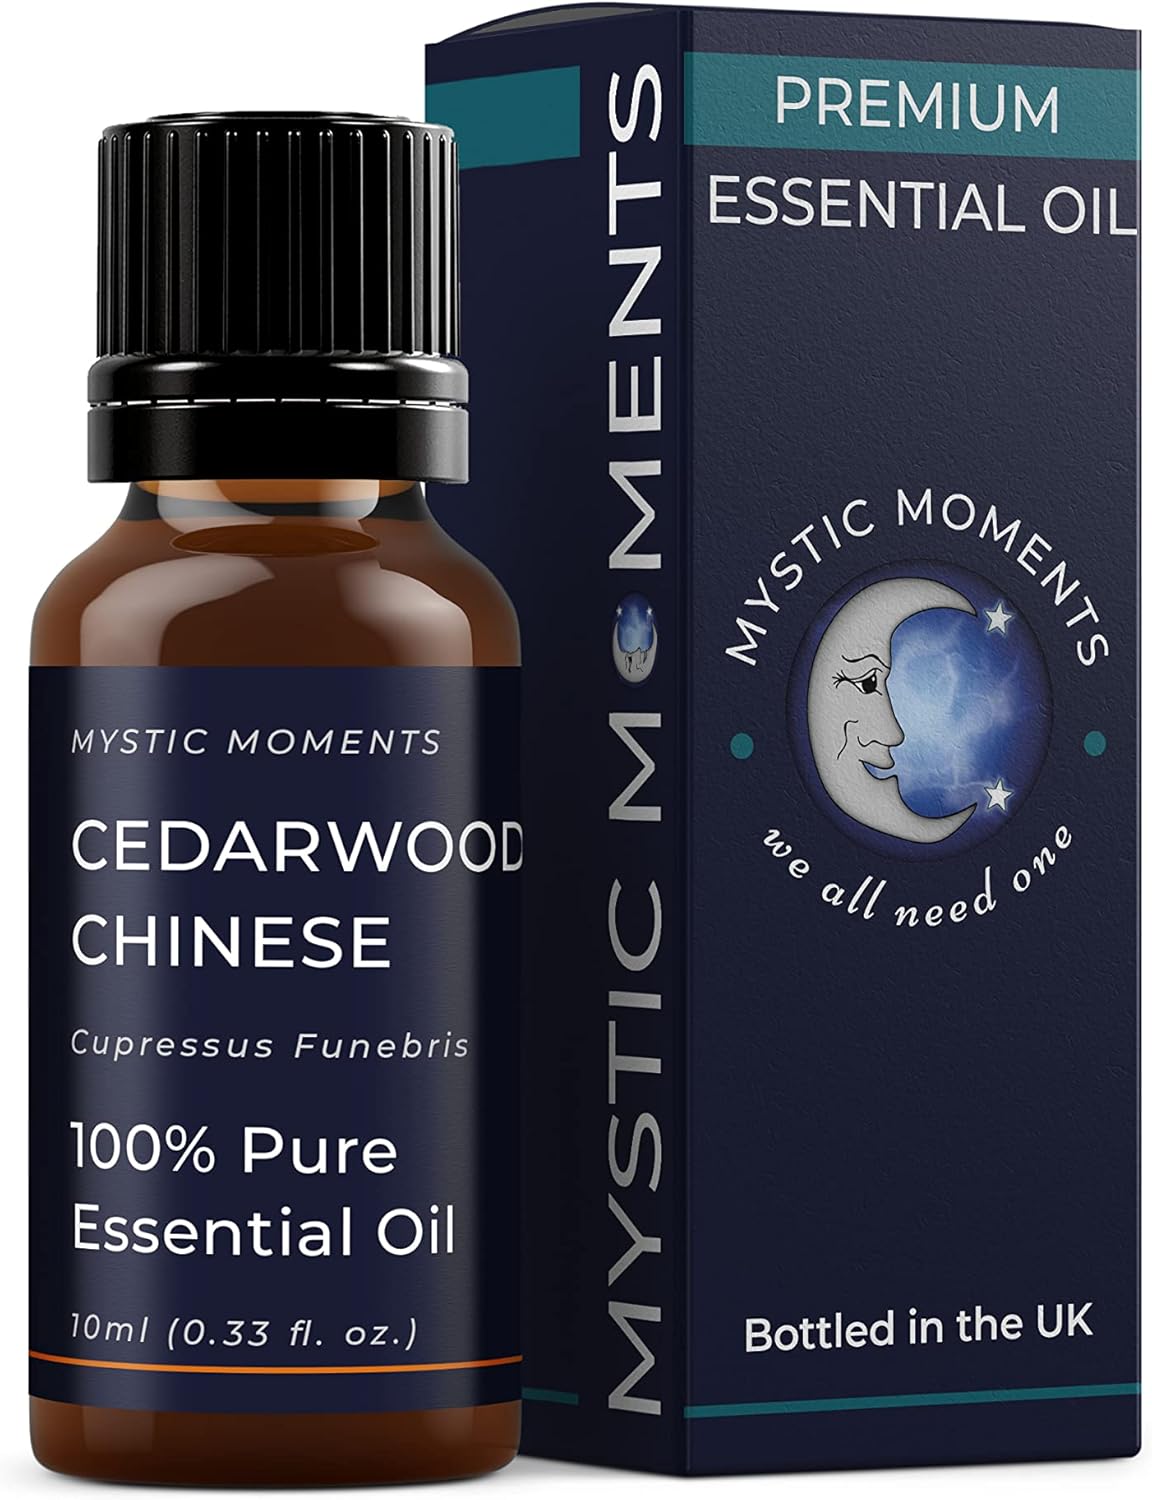 Mystic Moments | Cedarwood Chinese Essential Oil 10ml - Pure & Natural oil for Diffusers, Aromatherapy & Massage Blends Vegan GMO Free